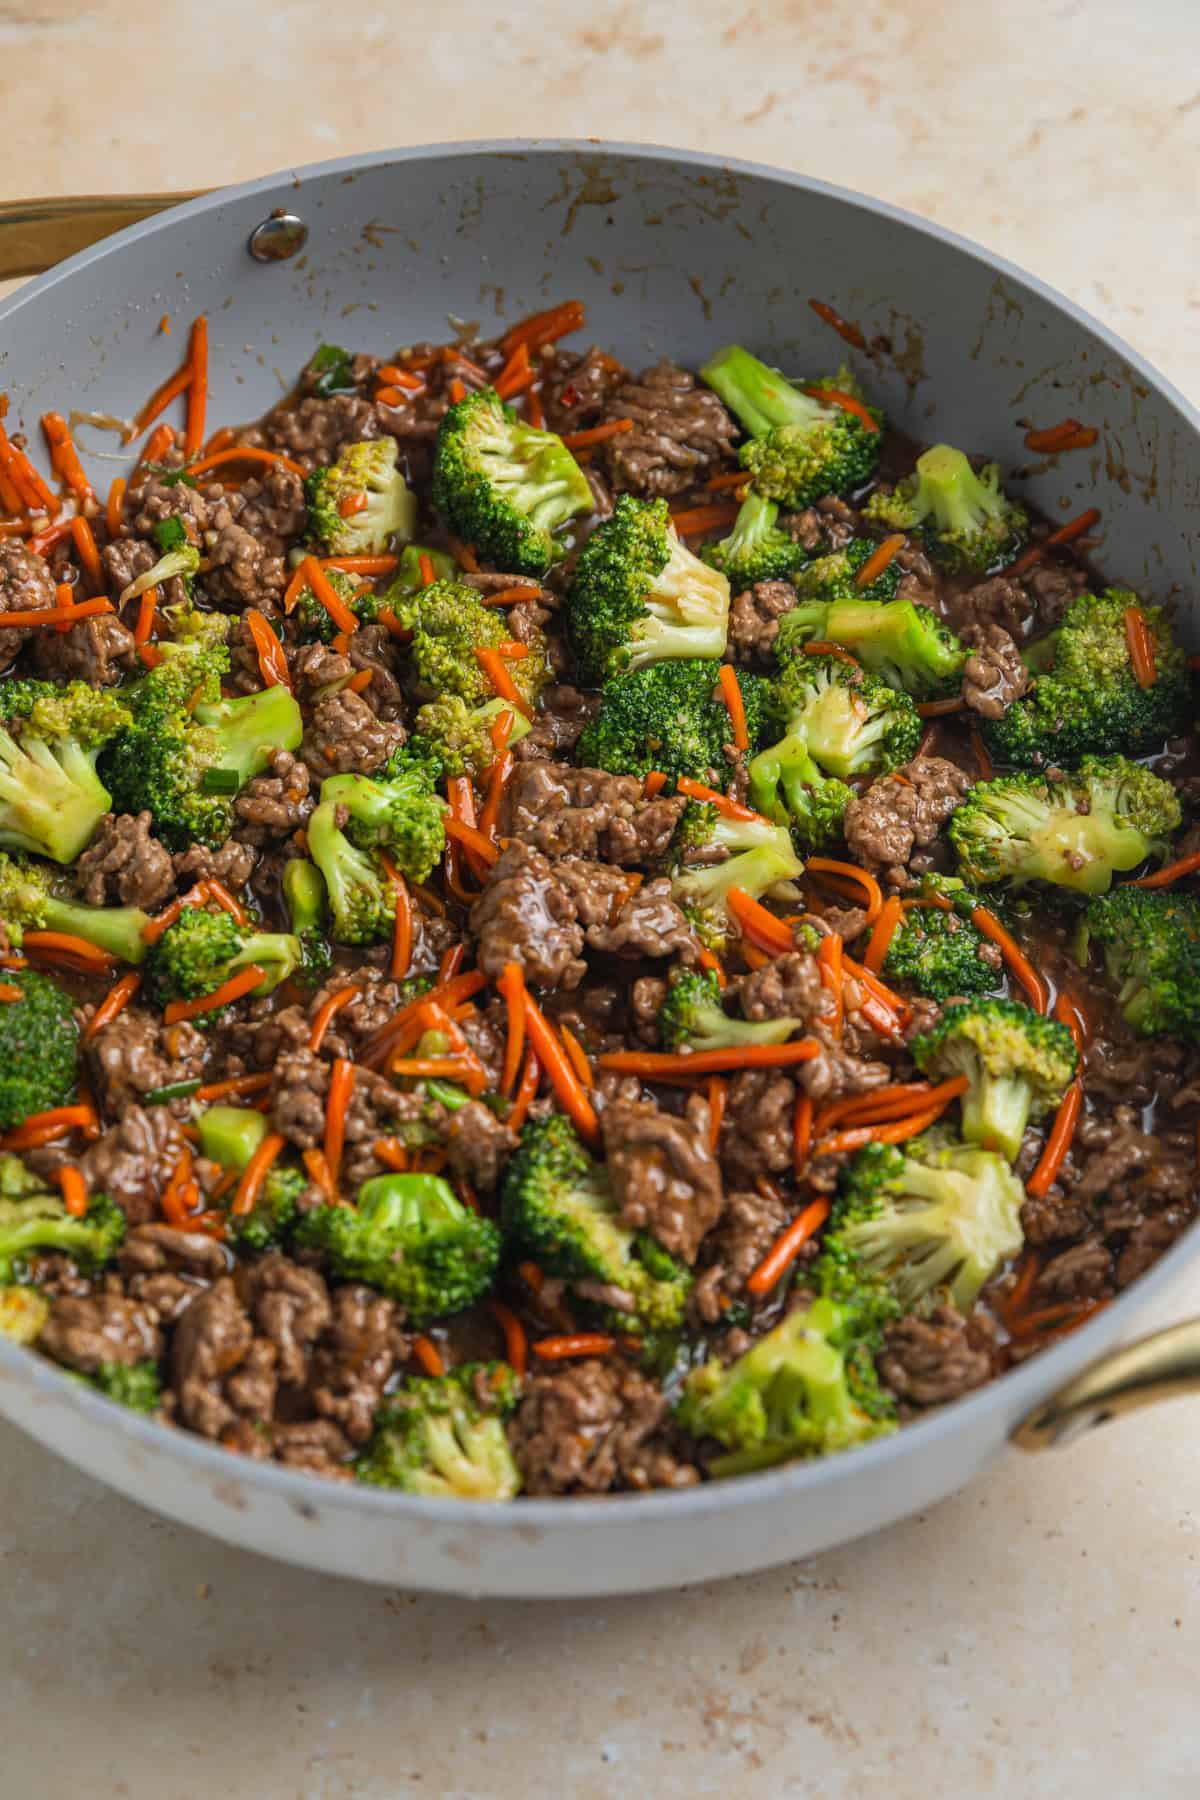 Teriyaki sauce added to skillet with beef and vegetable stir fry.